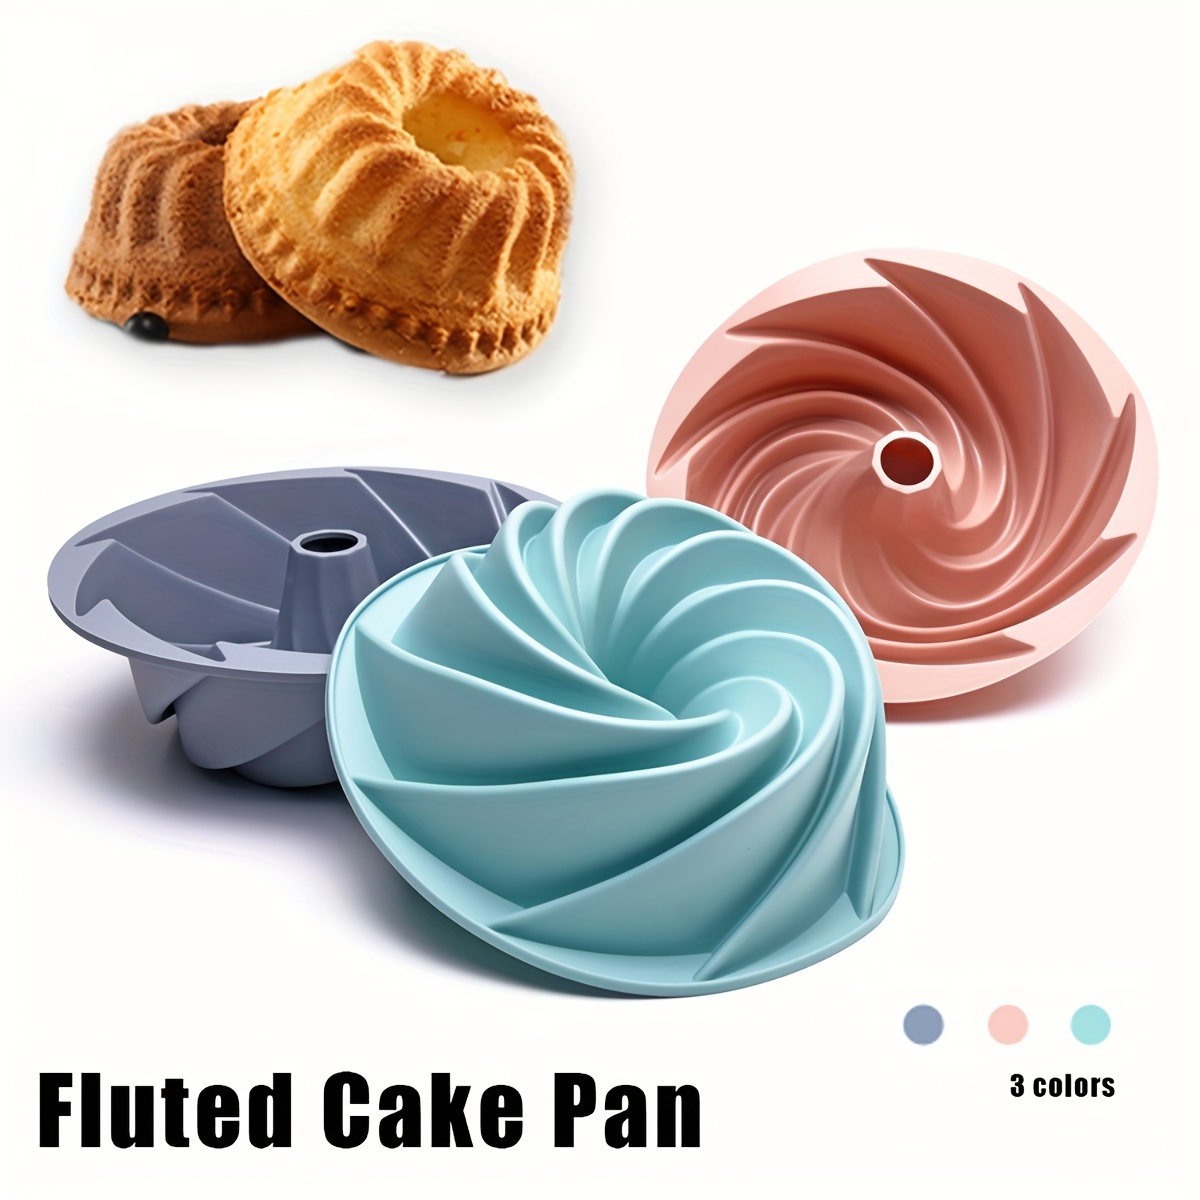 Bake Delicious Cakes, Pudding, Breads & More With This European Grade  Silicone Fluted Cake Pan For Hotel/Commercial